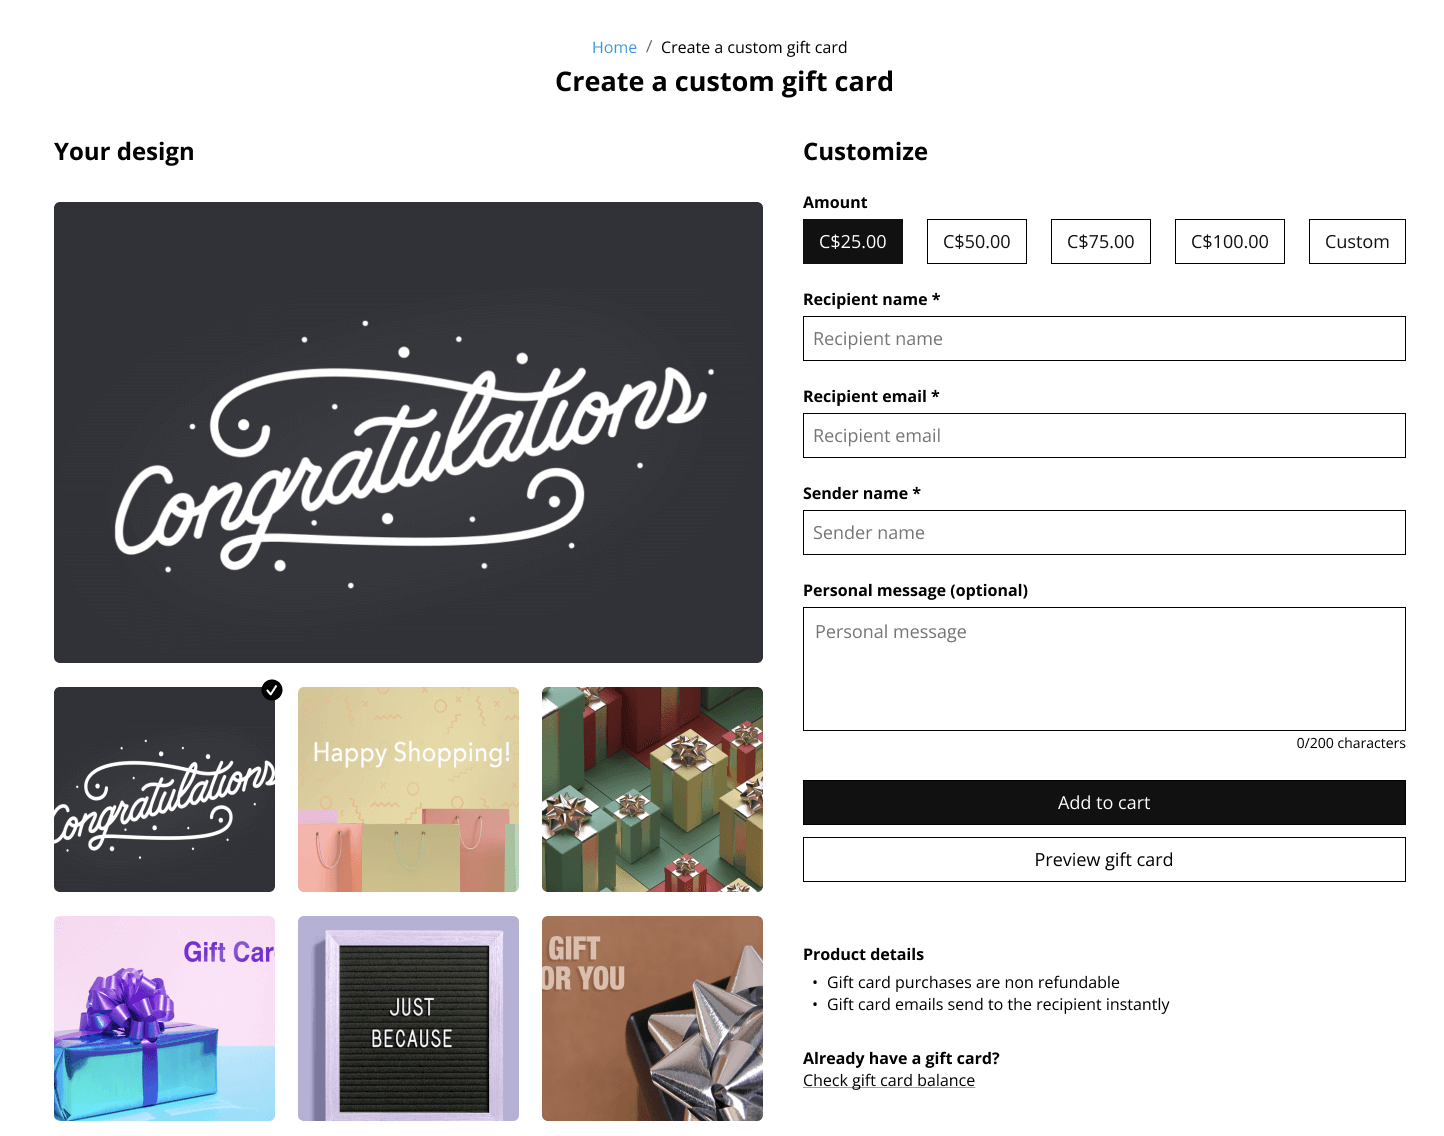 Gift card sell screen with fields to fill out personalized information.